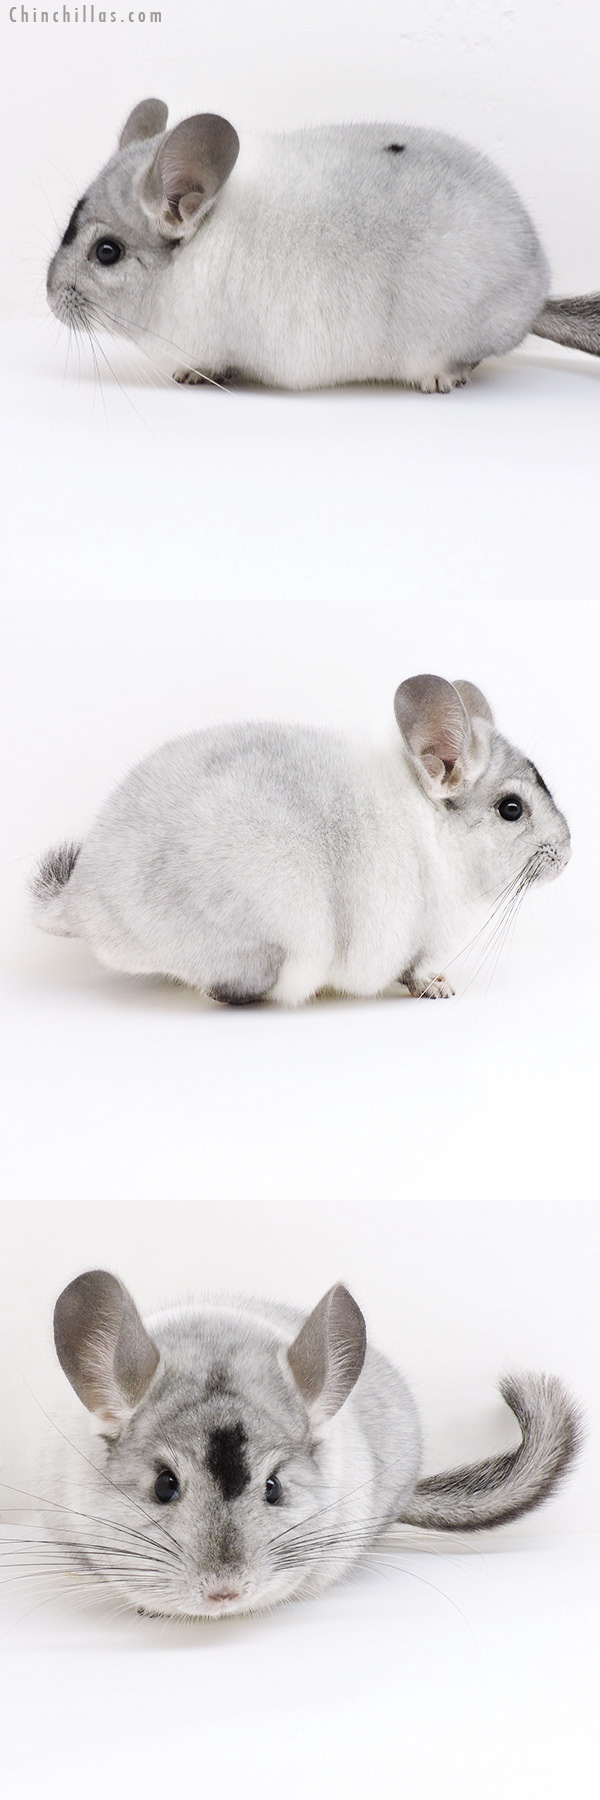 Chinchilla or related item offered for sale or export on Chinchillas.com - 19154 Herd Improvement Quality Extreme White Mosaic Male Chinchilla